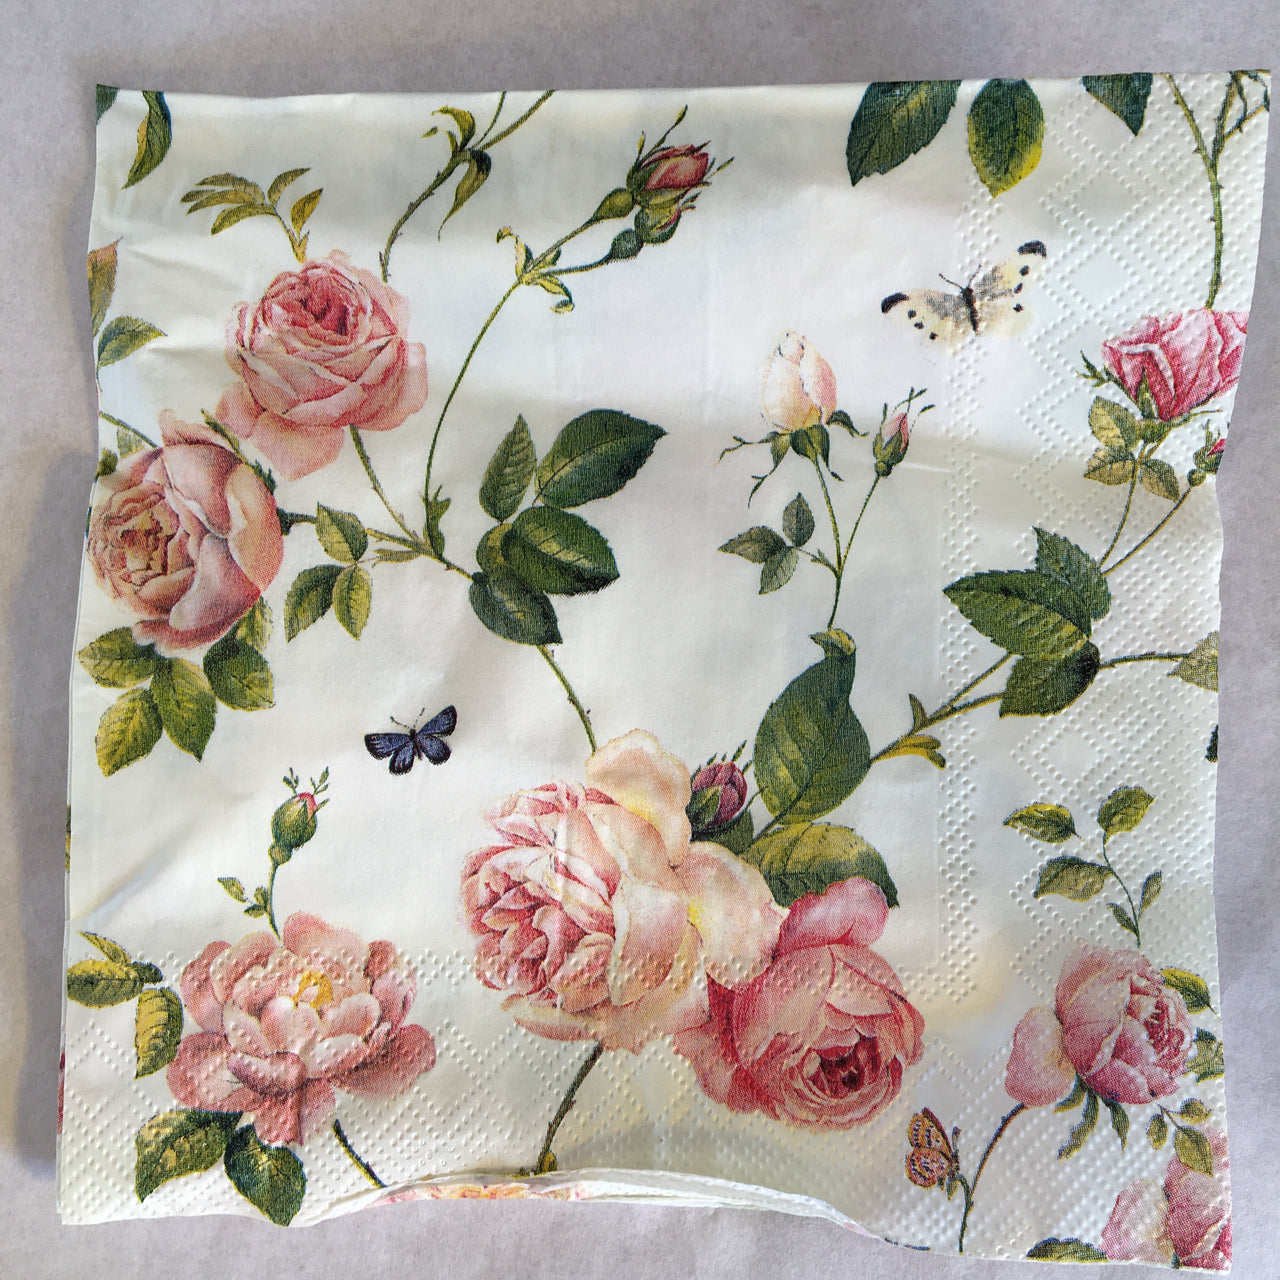 Decoupage Paper of Rambling Pink Roses on Blue Napkin